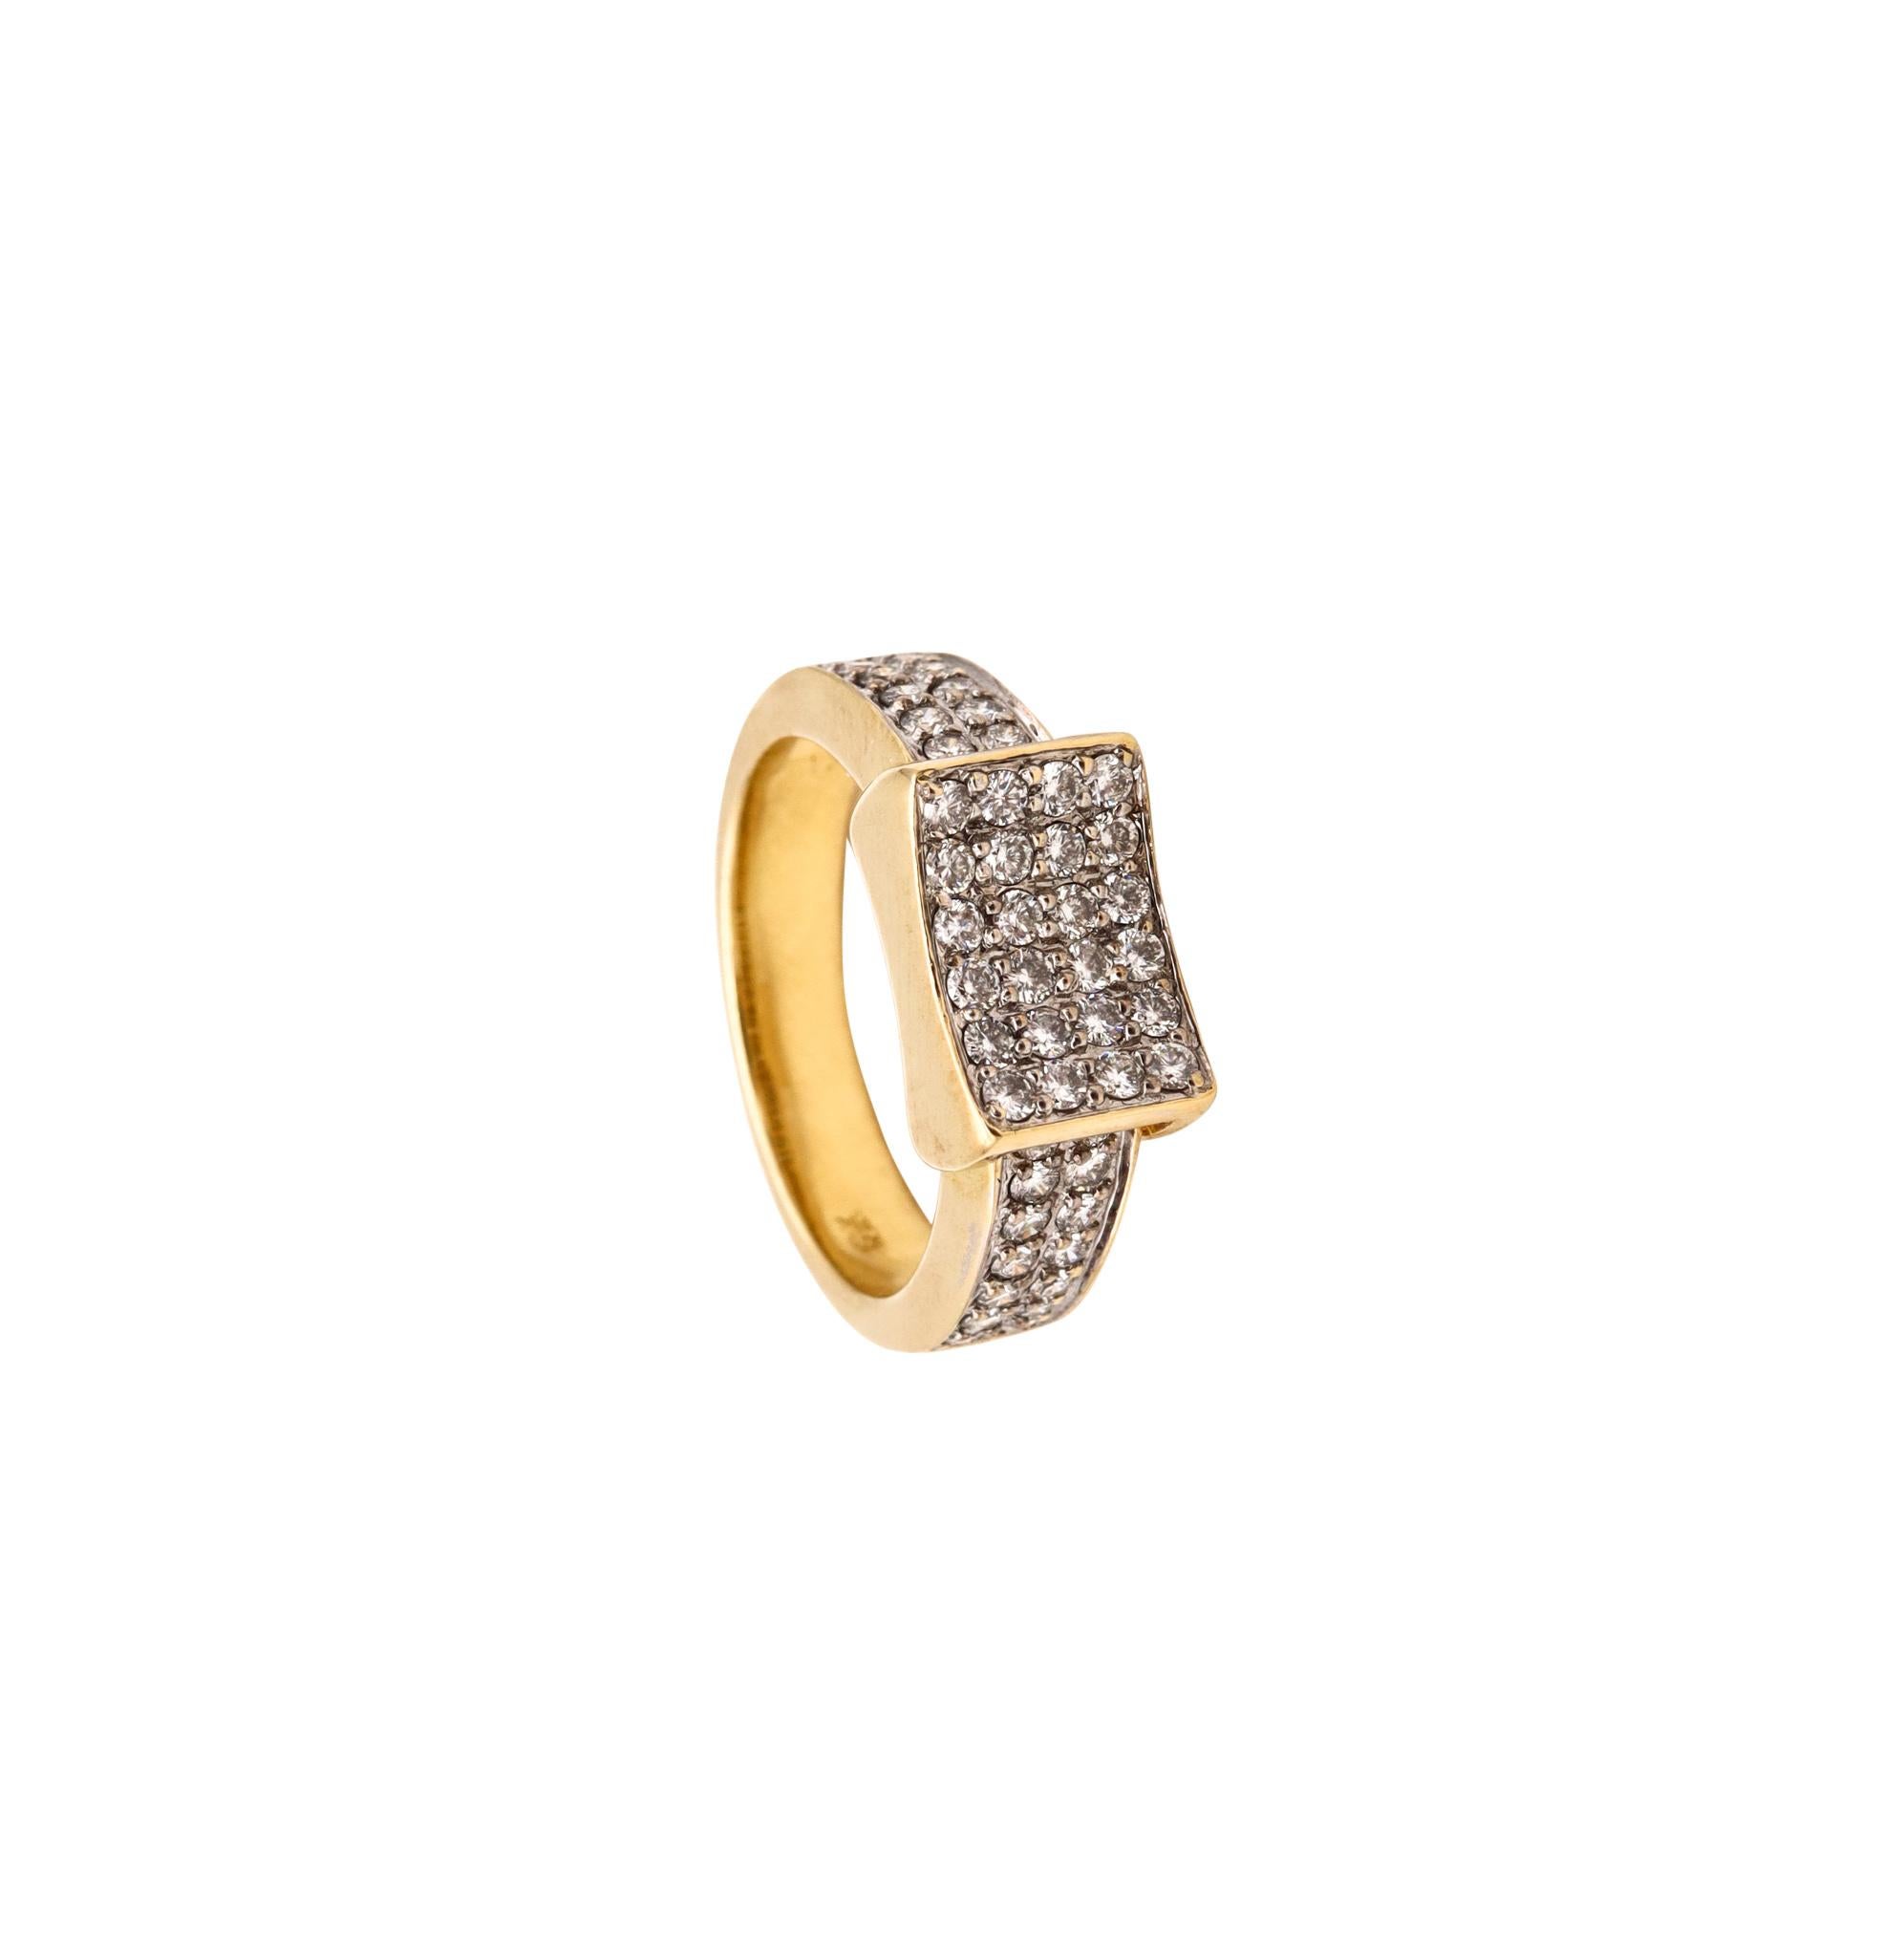 Jeweled geometric ring.

A modern jeweled band ring crafted in Italy in solid yellow gold of 18 karats with white gold accents for the diamonds settings.

Mounted, with a beautiful pave setting of 52 very fine calibrated round brilliants cuts